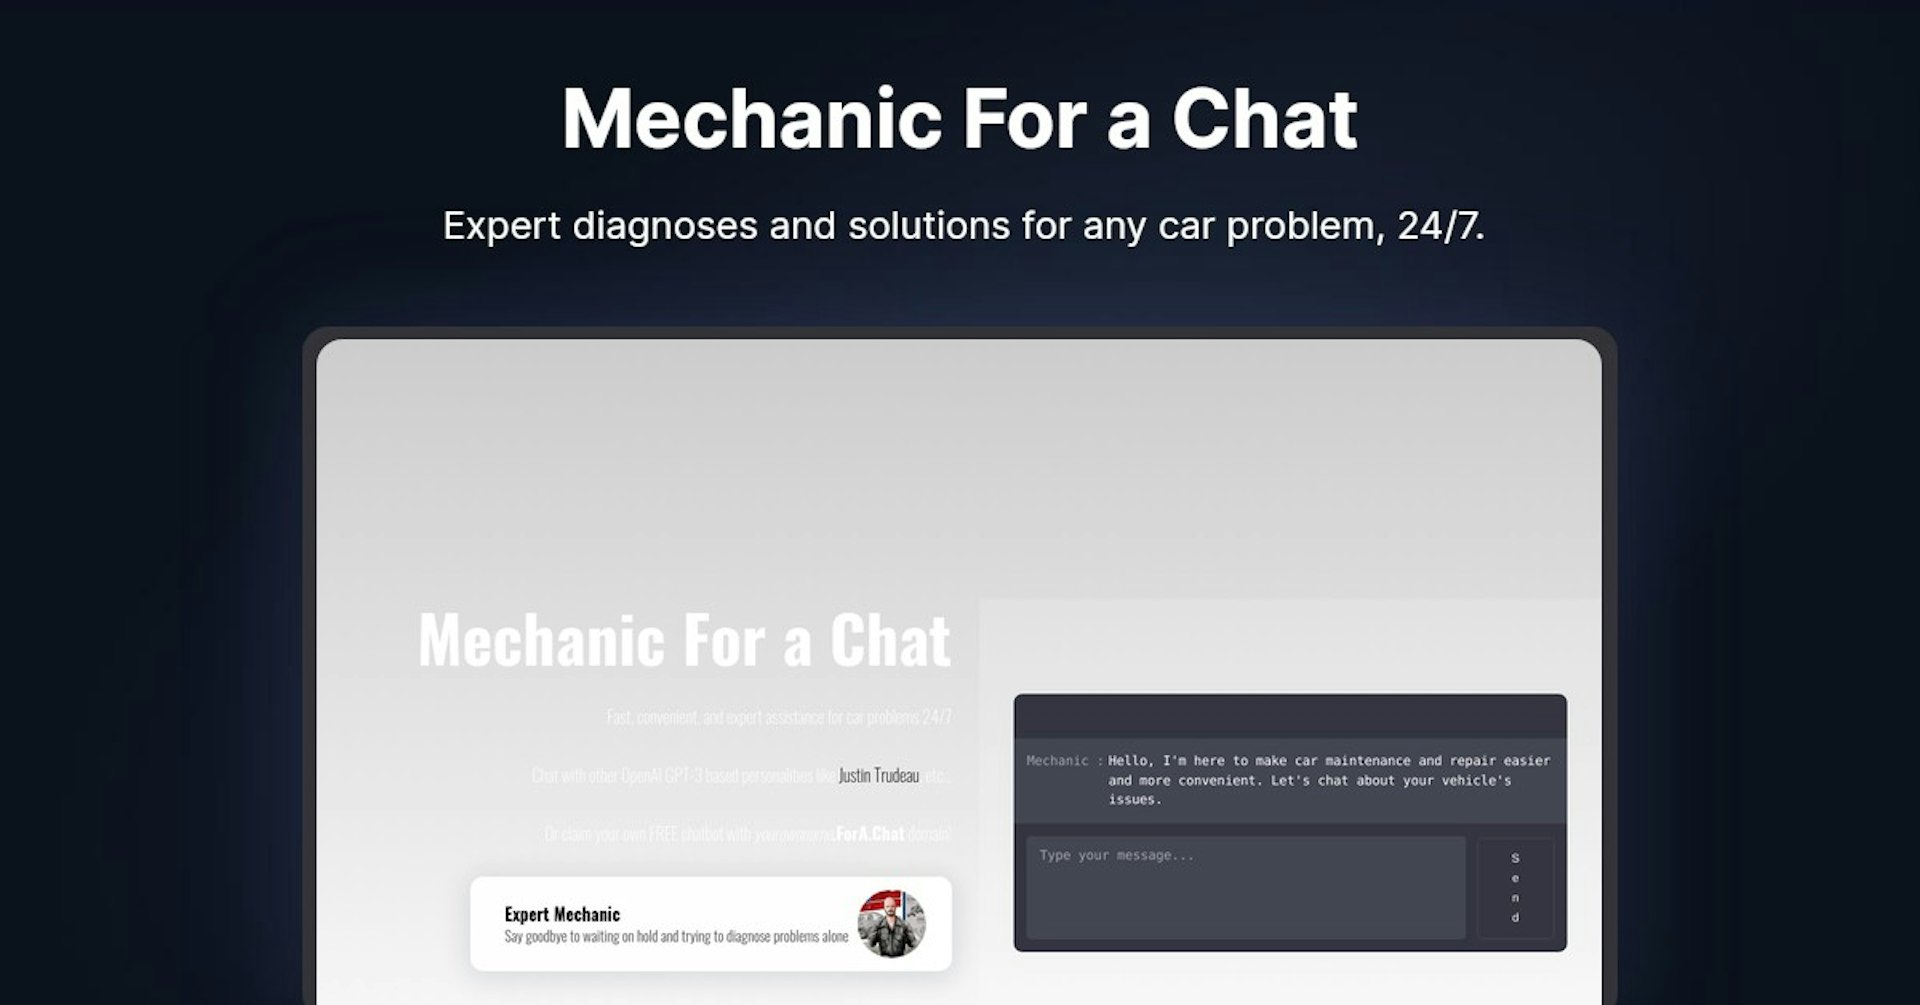 Mechanic For a Chat